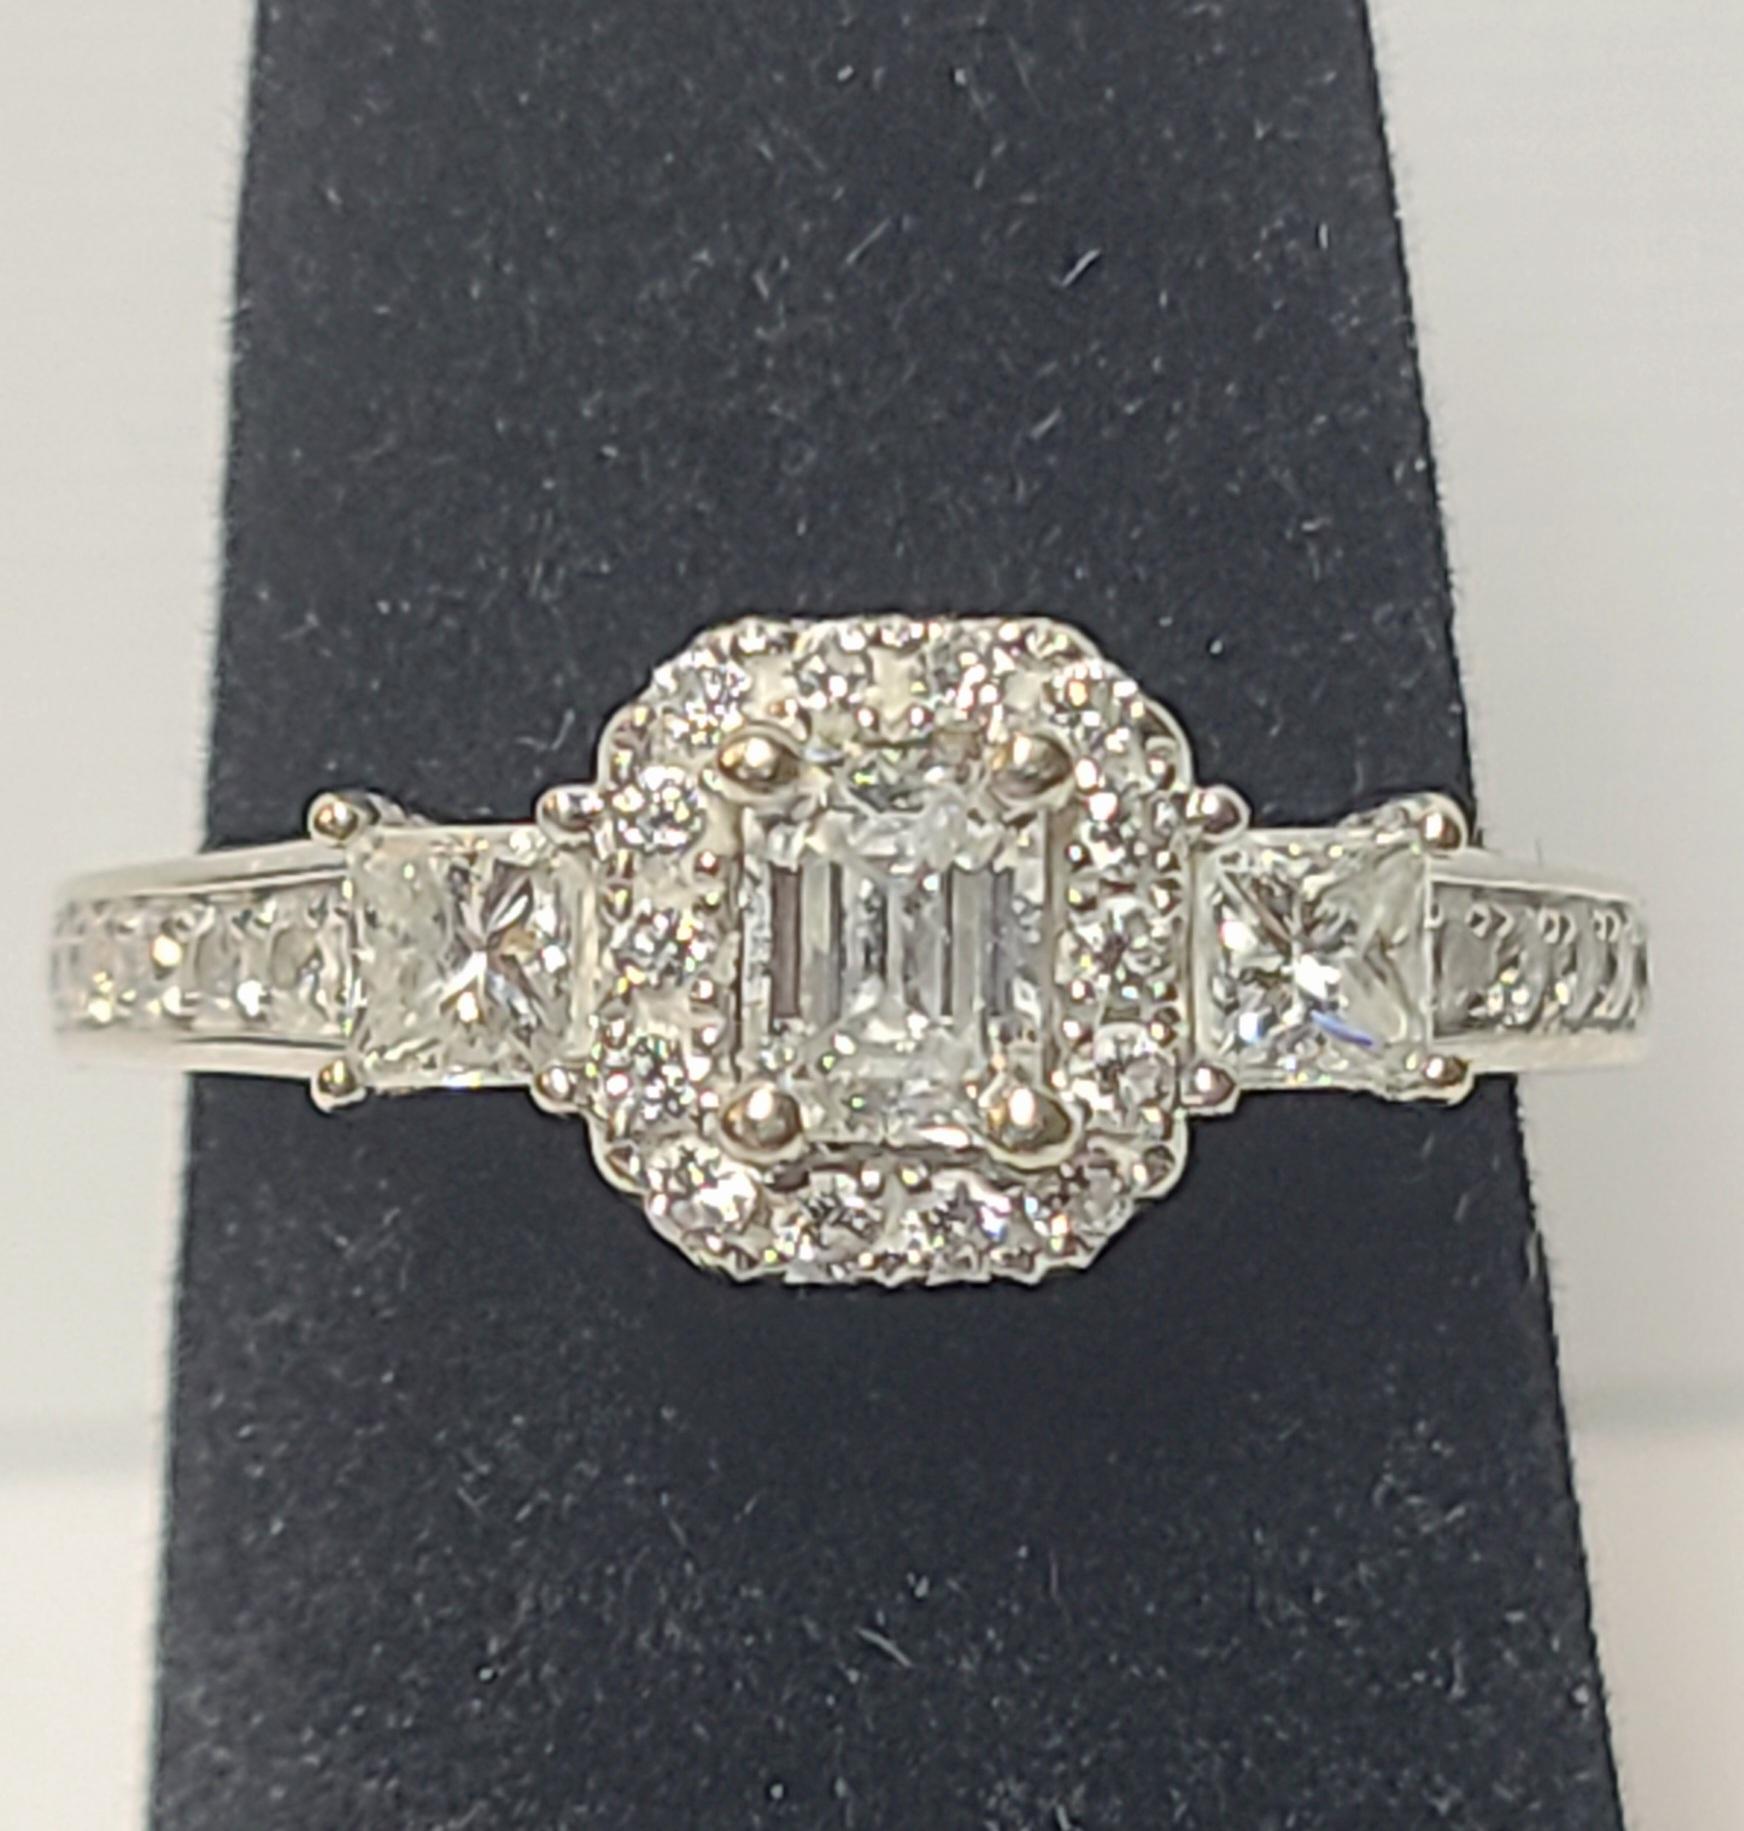 Celebrate tomorrow, today, and beyond with this brightly polished 14k white gold engagement ring, featuring a stunning interplay of mixed-cut diamonds in a breathtaking design with the trademark LEO DIAMOND brilliance and fire. 

An emerald cut